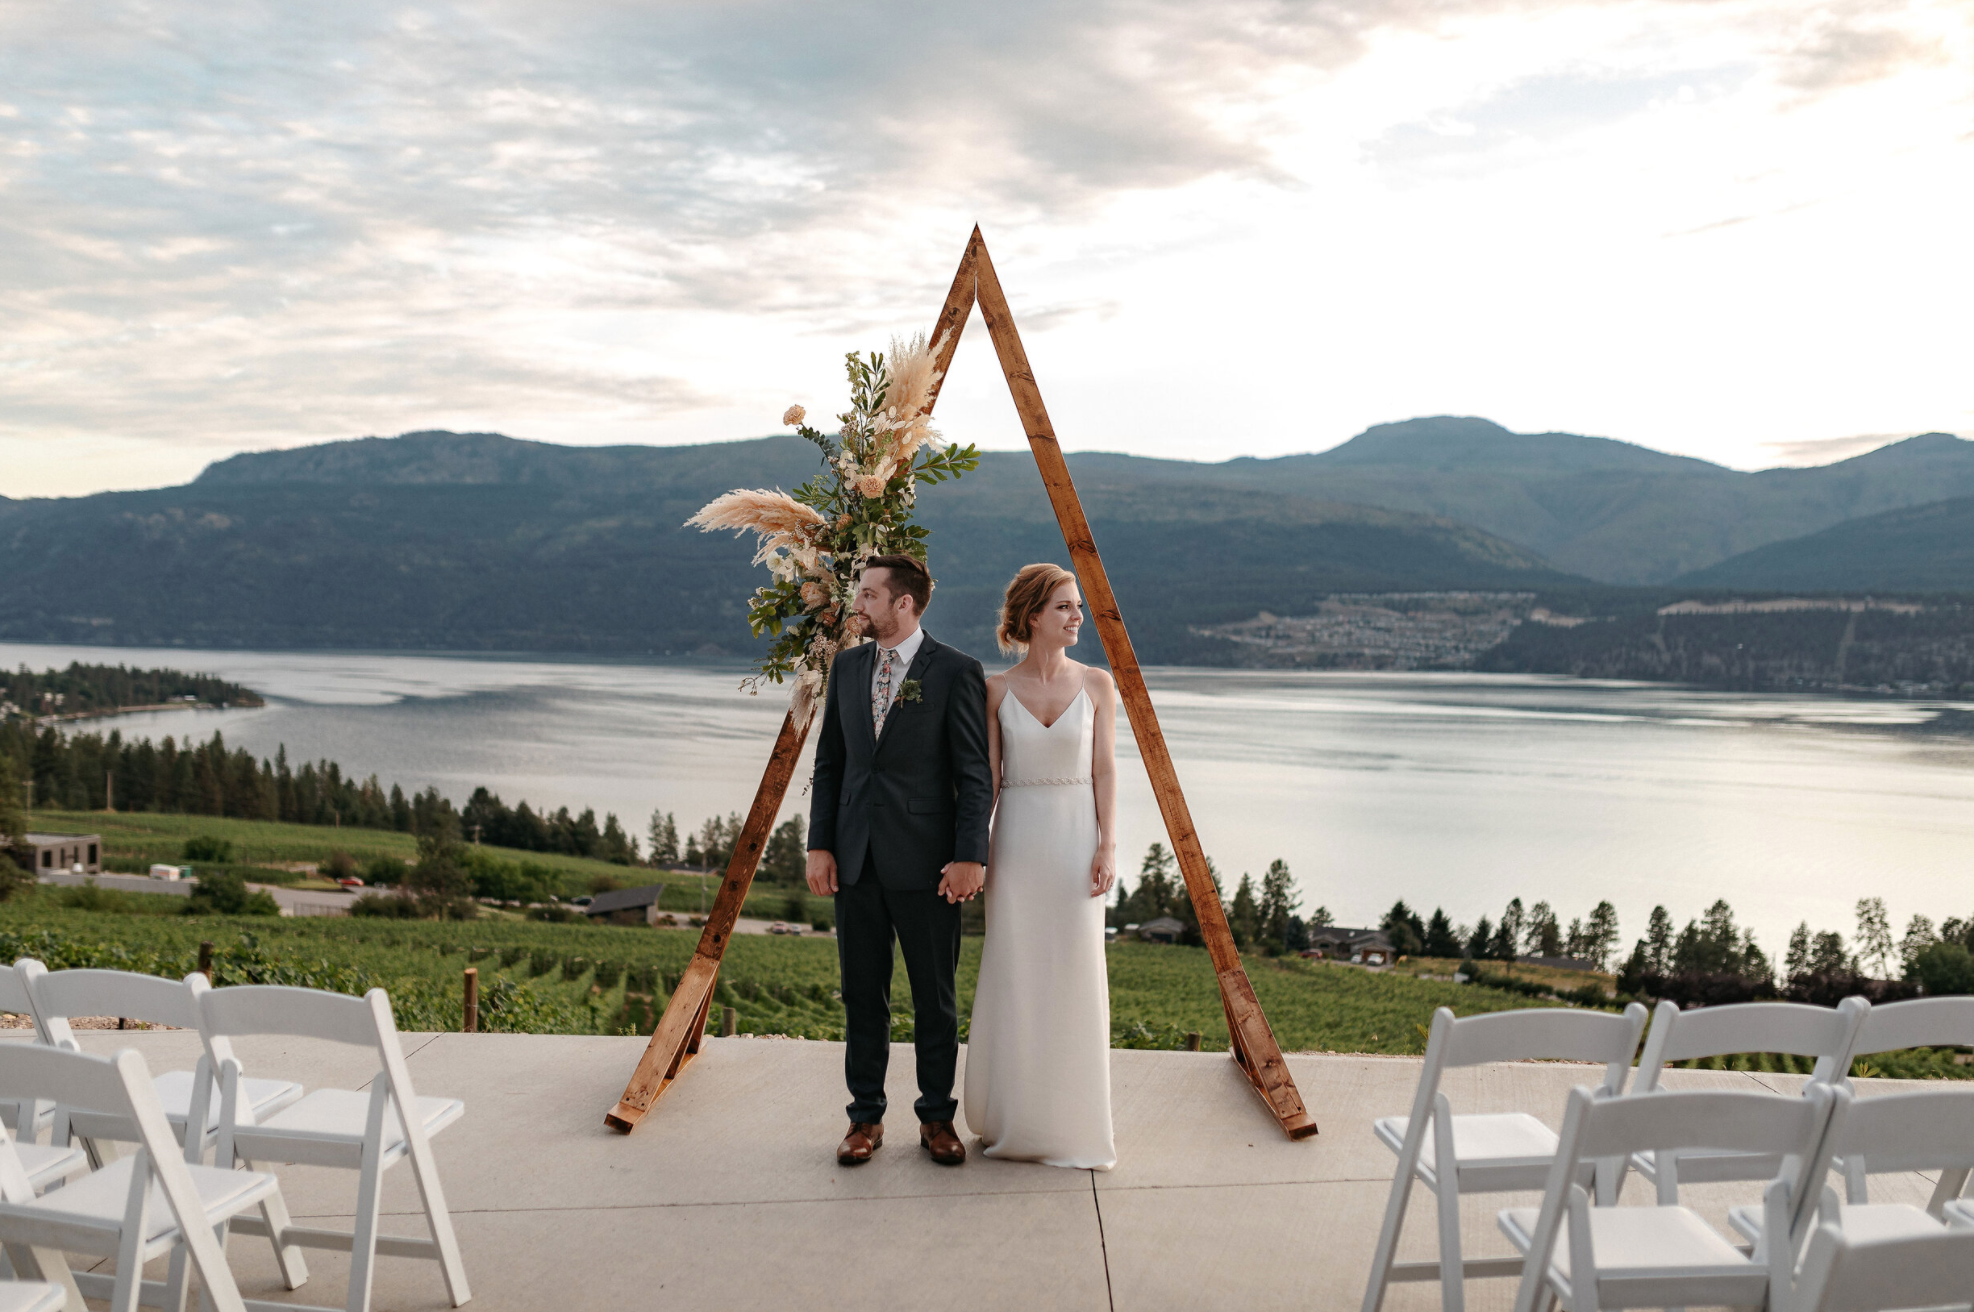 Couple on ceremony deck in front of wedding backdrop and lake in the Okanagan